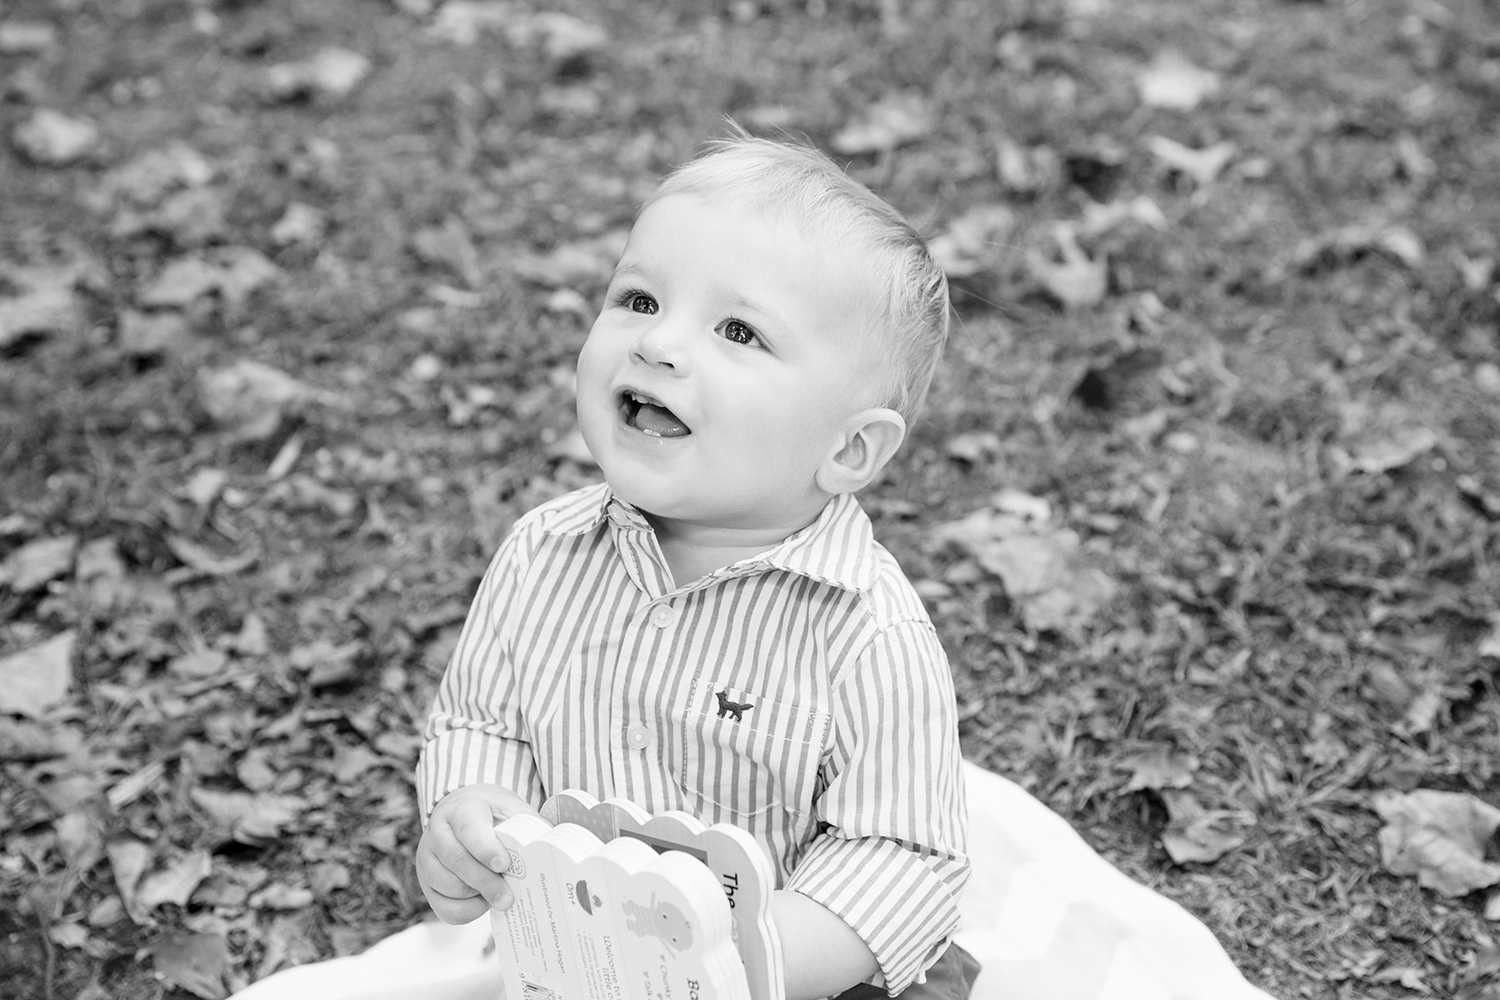 Christophers One Year Old Photos - Image Property of www.j-dphoto.com